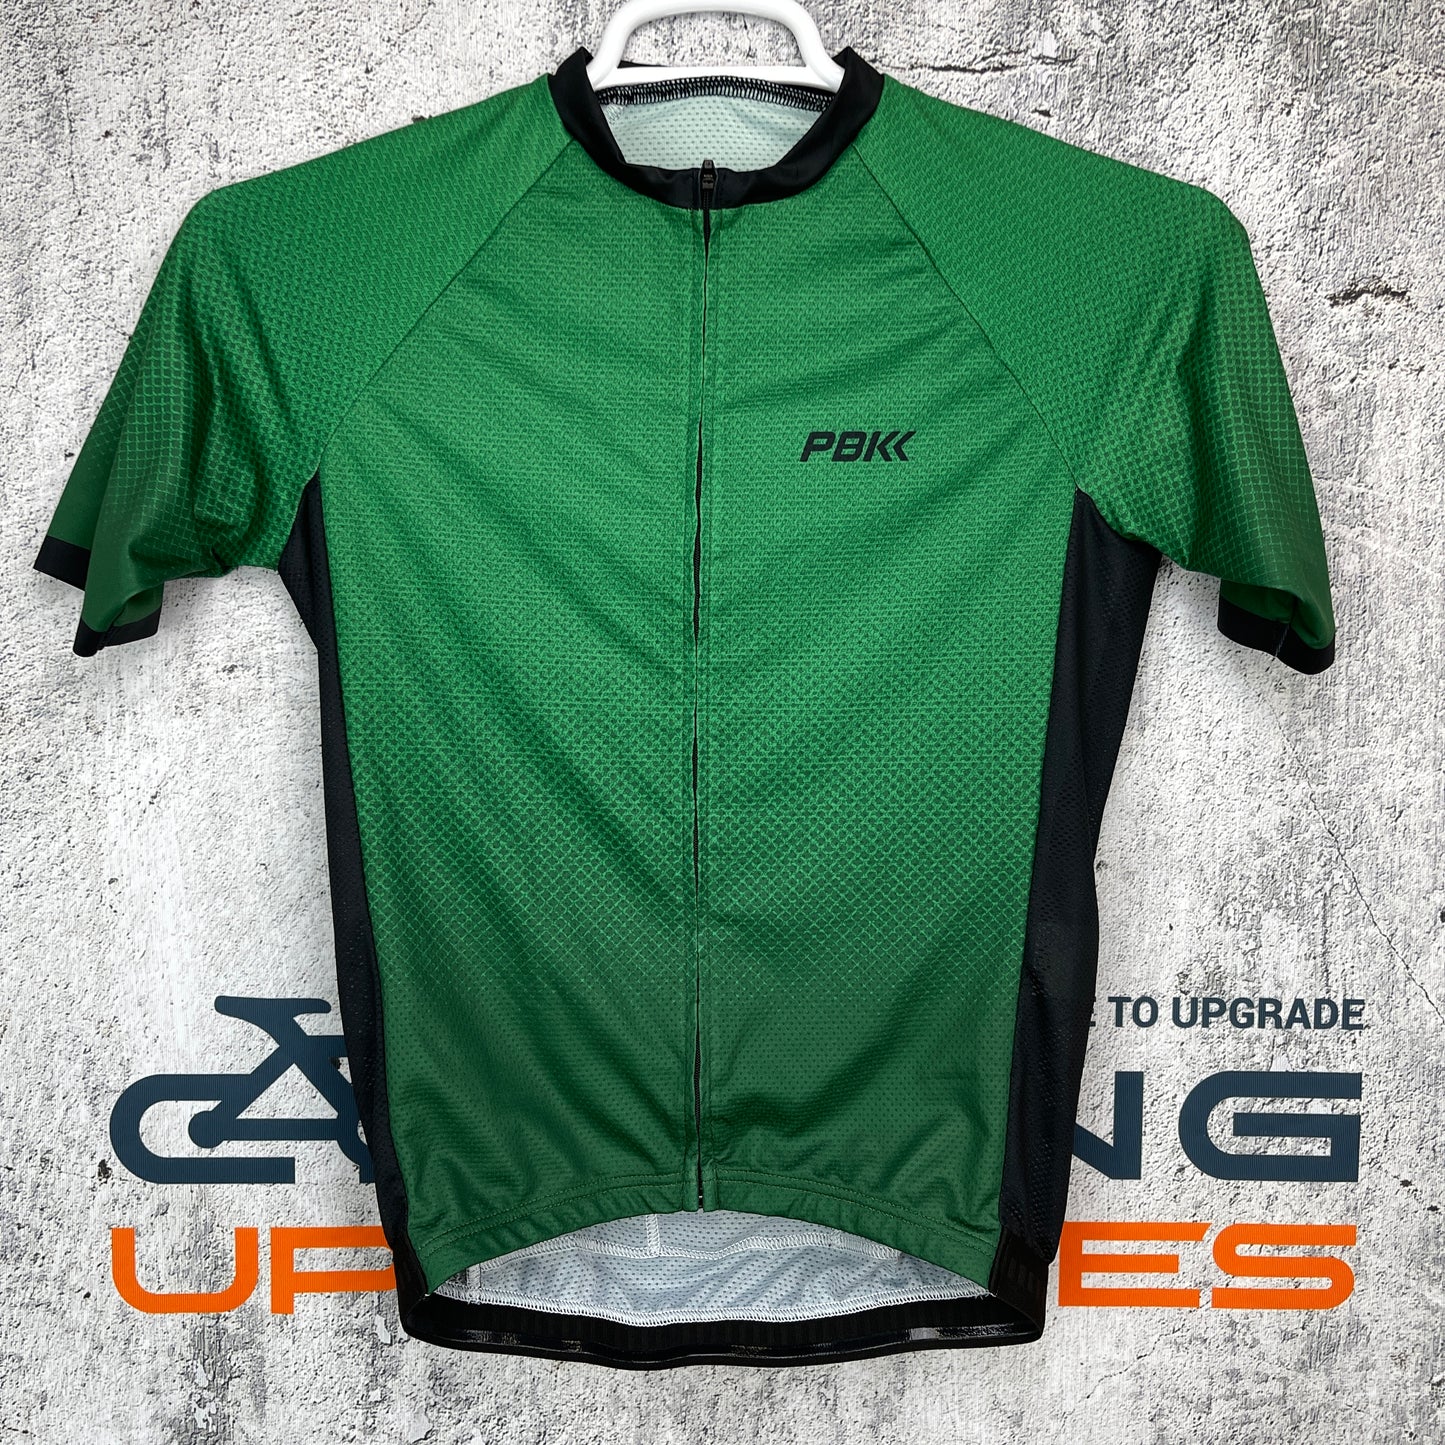 New! PBK Crux Jersey Men's Small Green Cycling Jersey